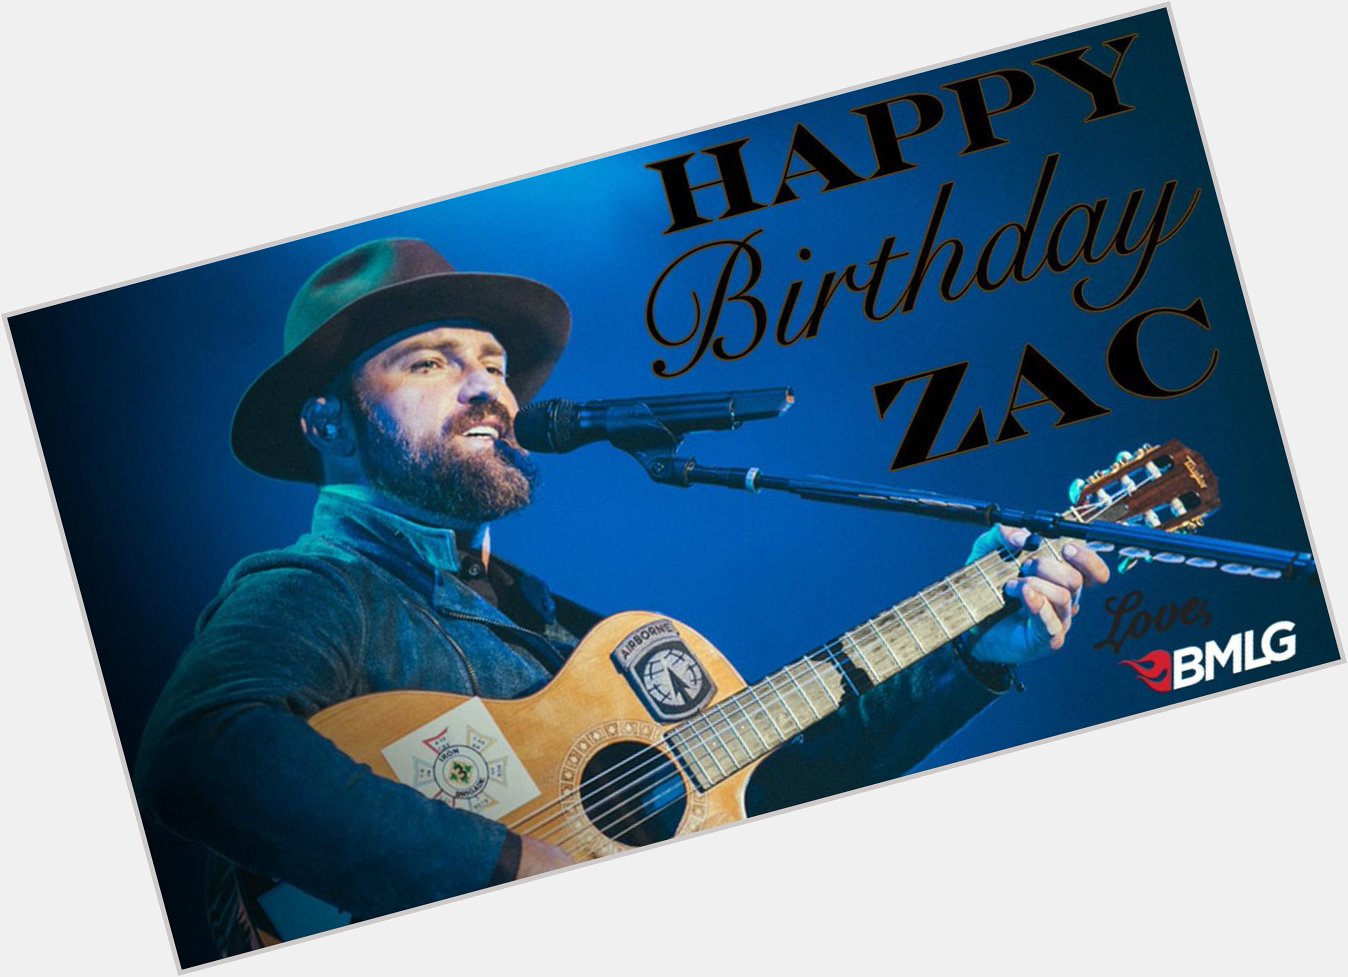 We are wishing a very Happy Birthday to Zac Brown of the today! 